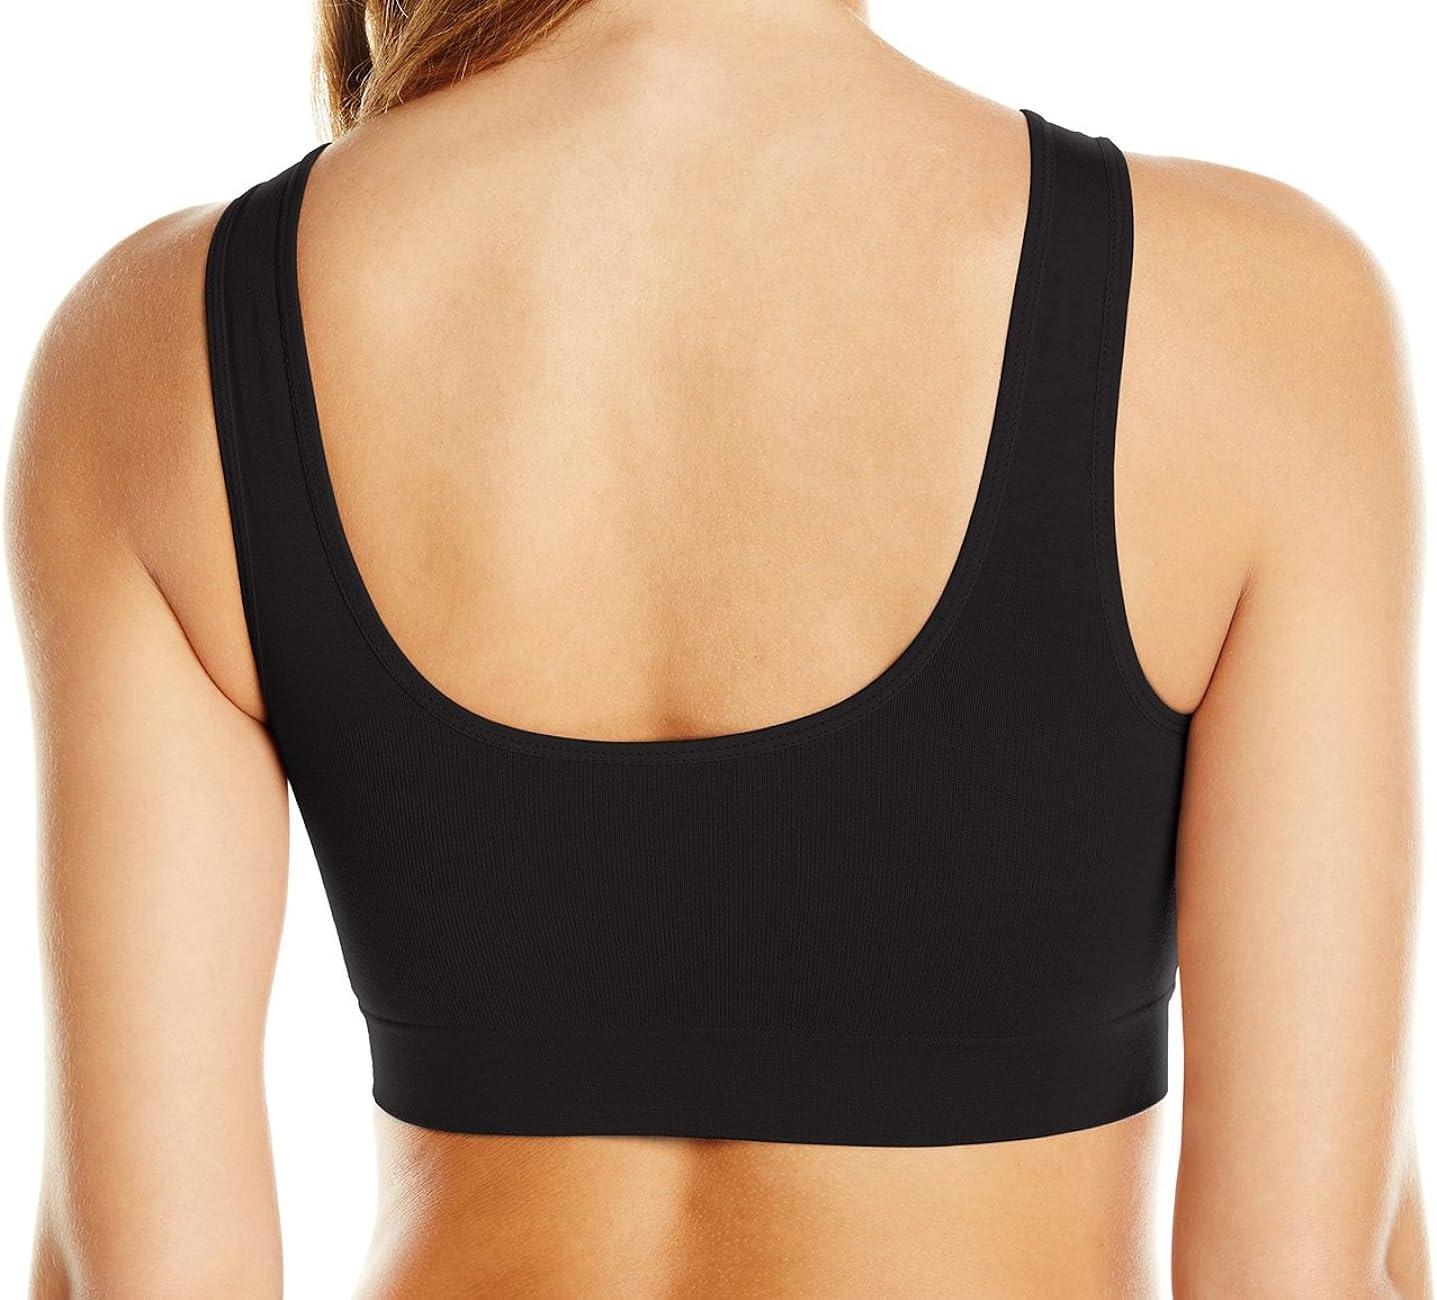 3-Pack Women's Seamless Wireless Sports Bra with Removable Pads